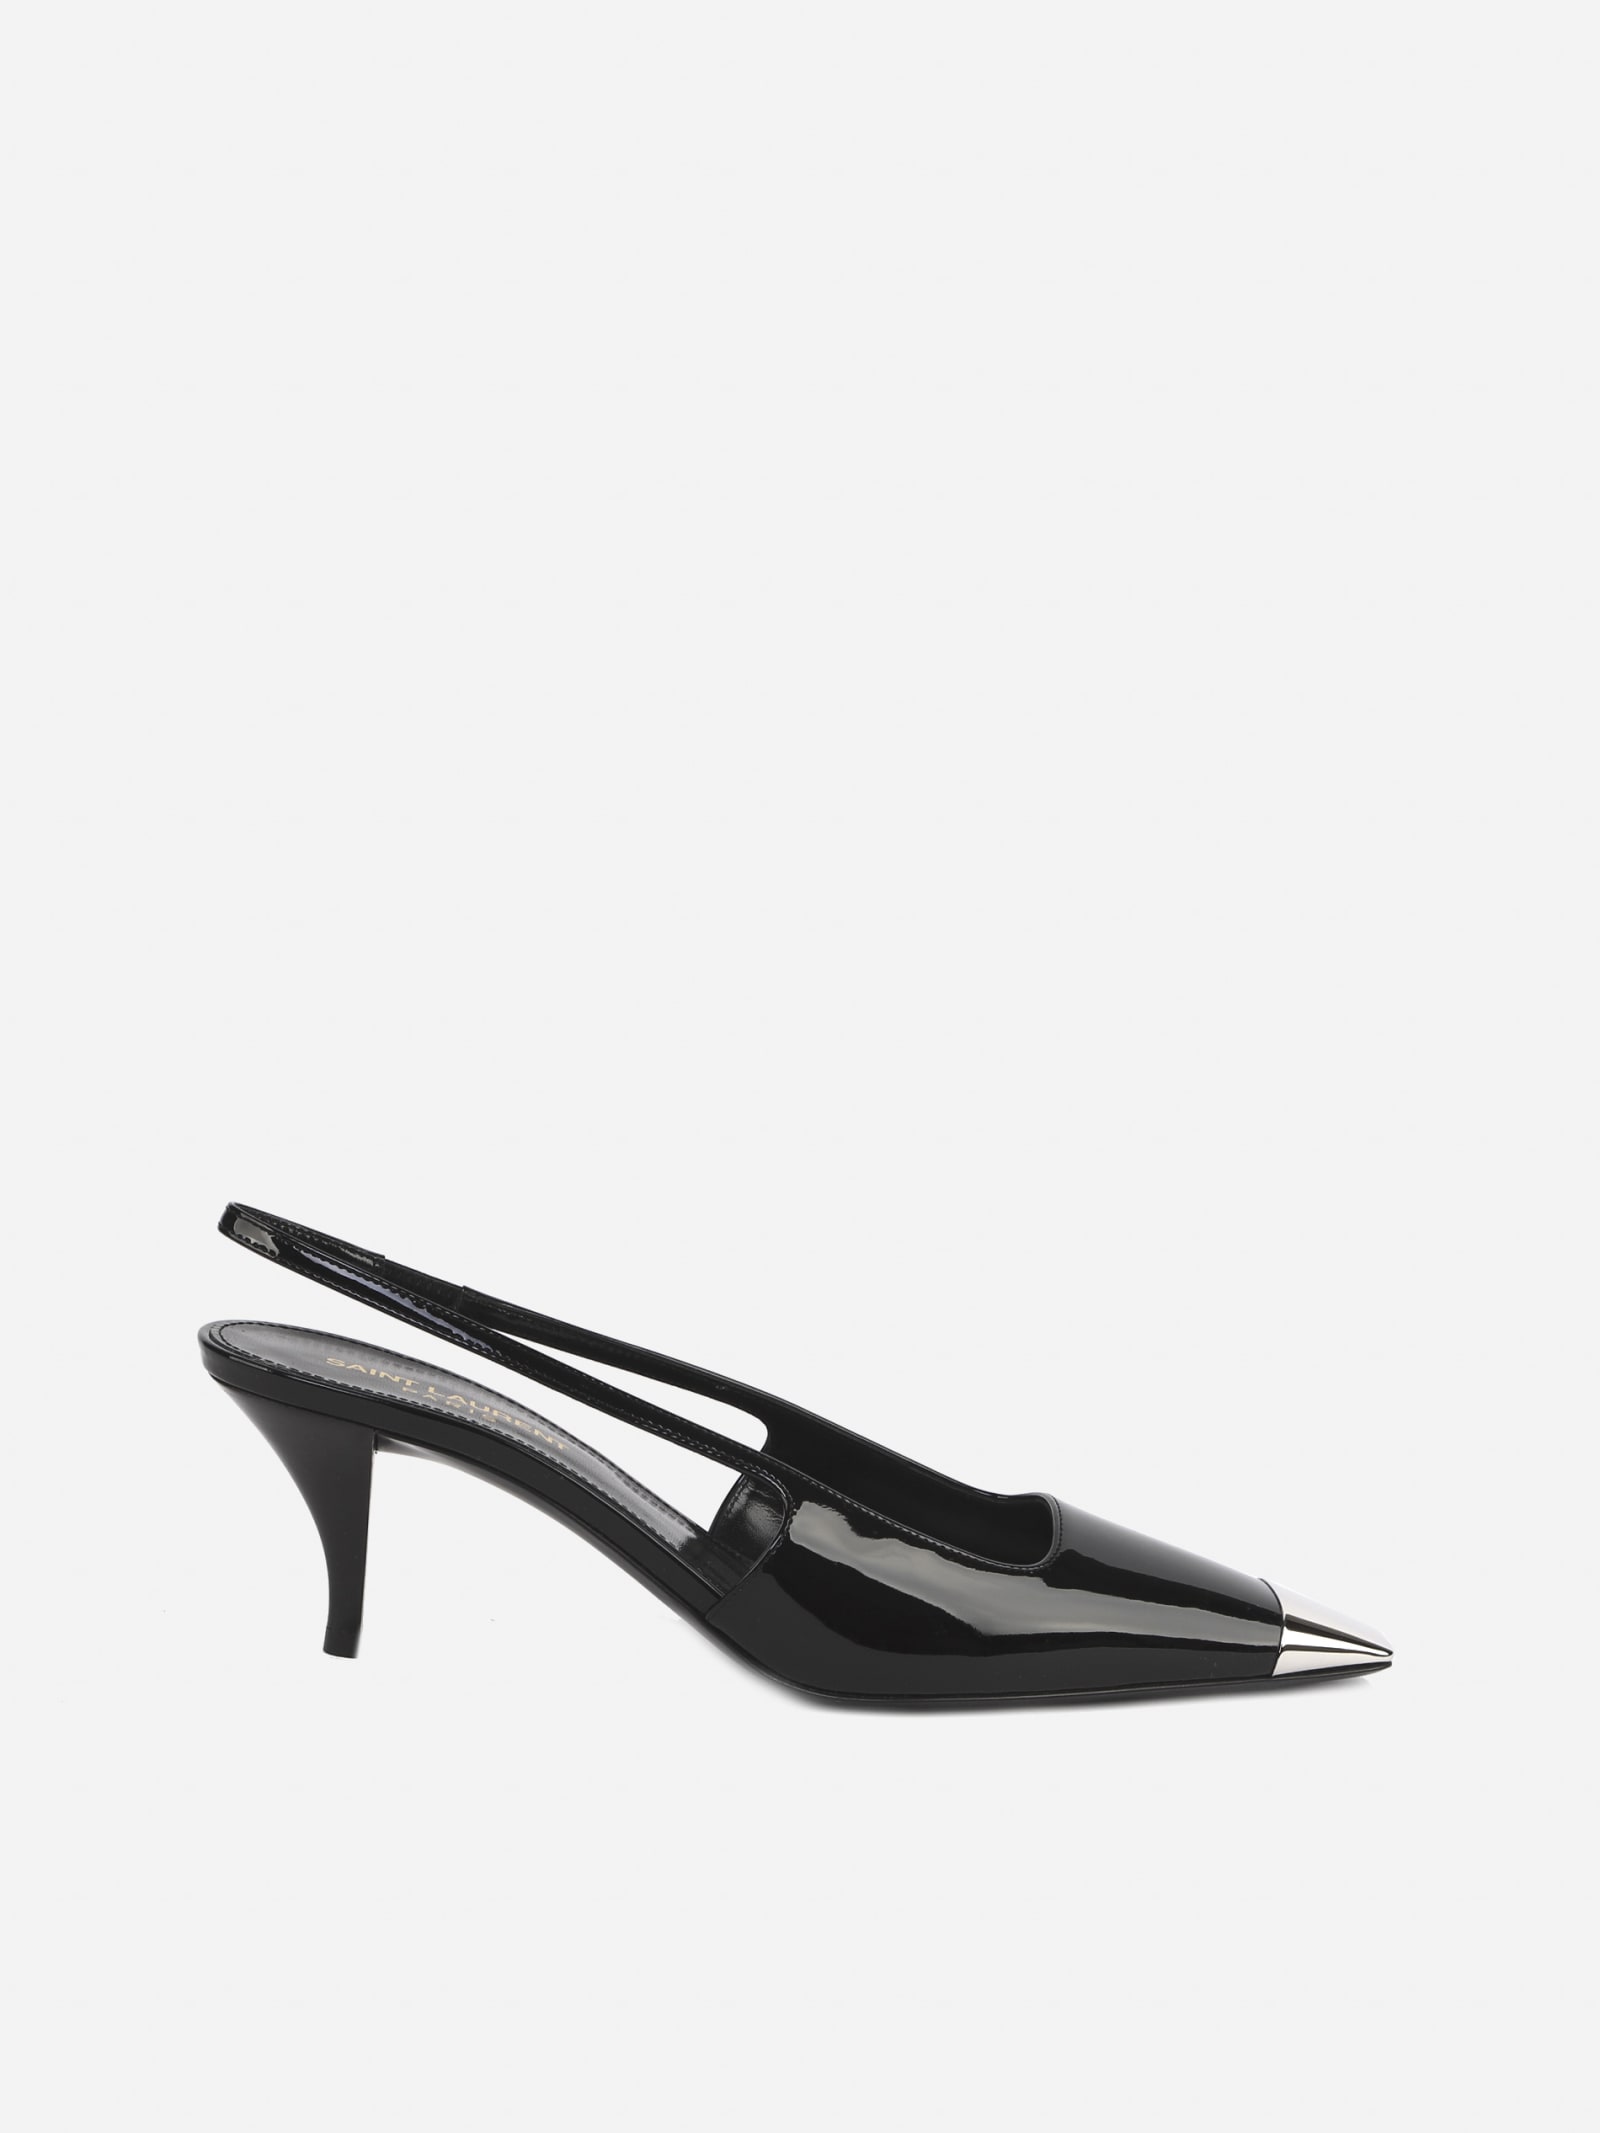 Buy Saint Laurent Patent Leather Slingback With Metal Tip online, shop Saint Laurent shoes with free shipping